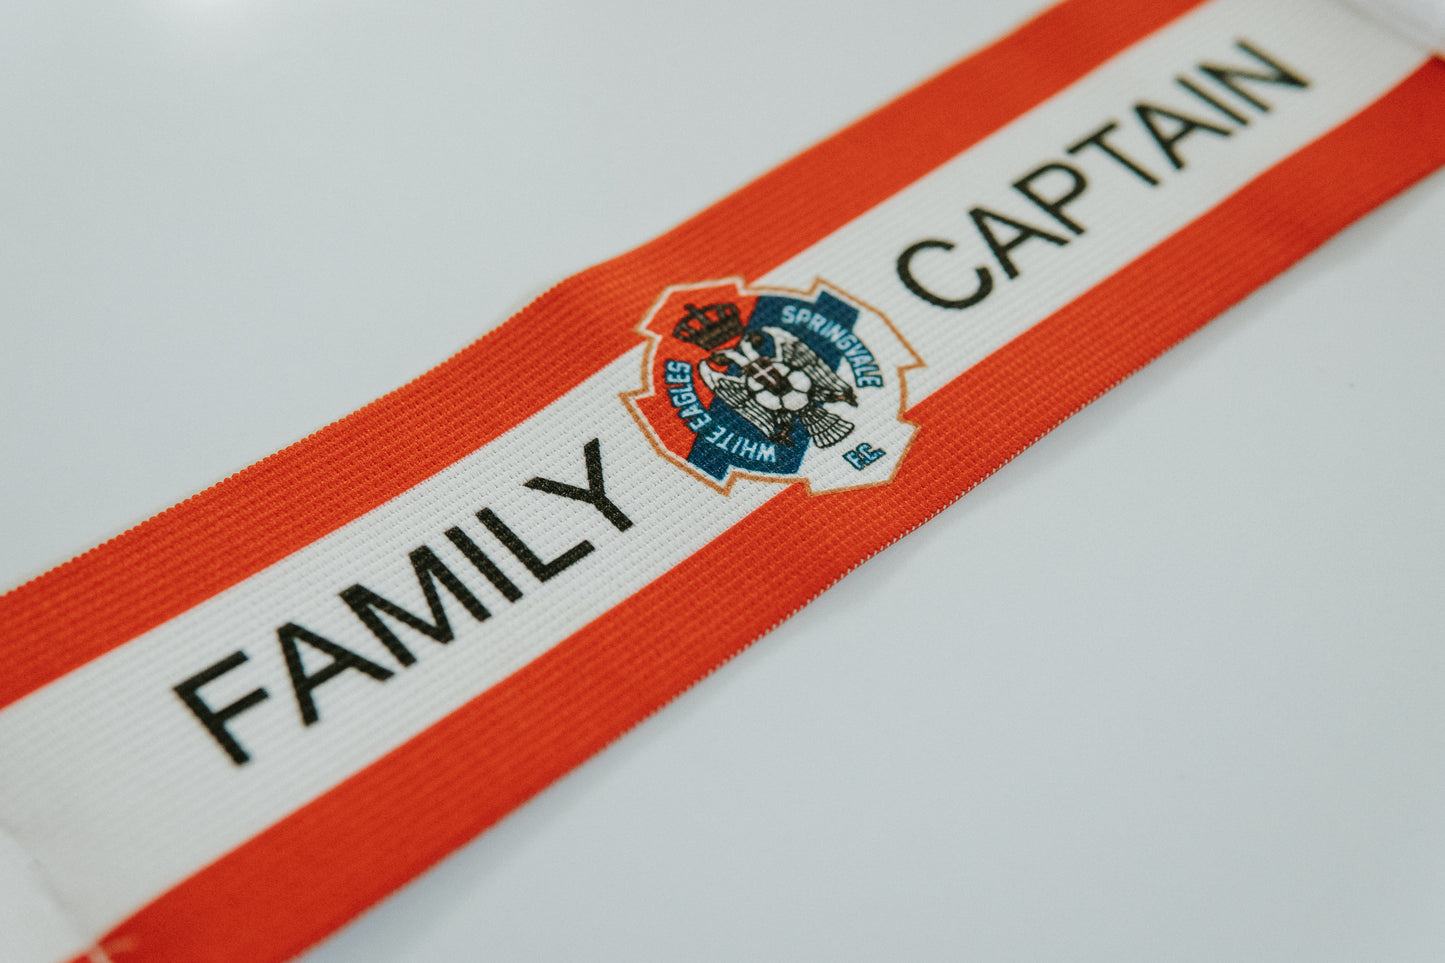 Custom made captains armband for soccer club in Australia. Custom to your team colours and badge.